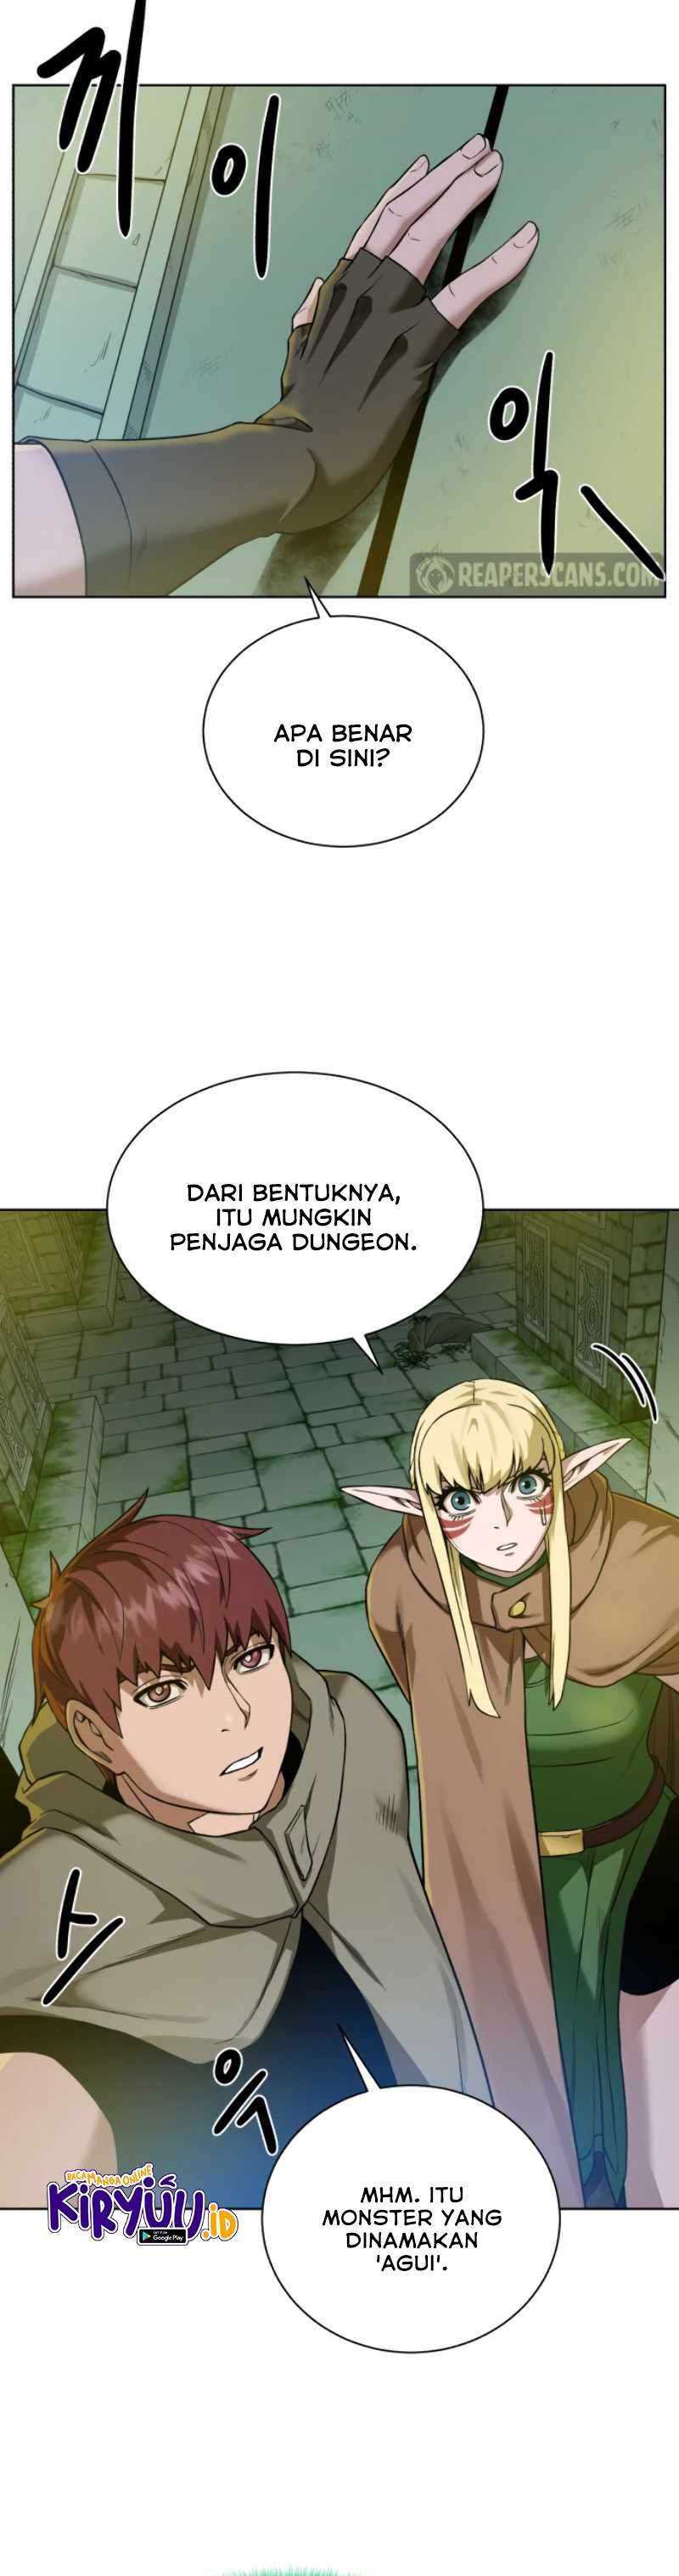 dungeons-artifacts Chapter chapter-27